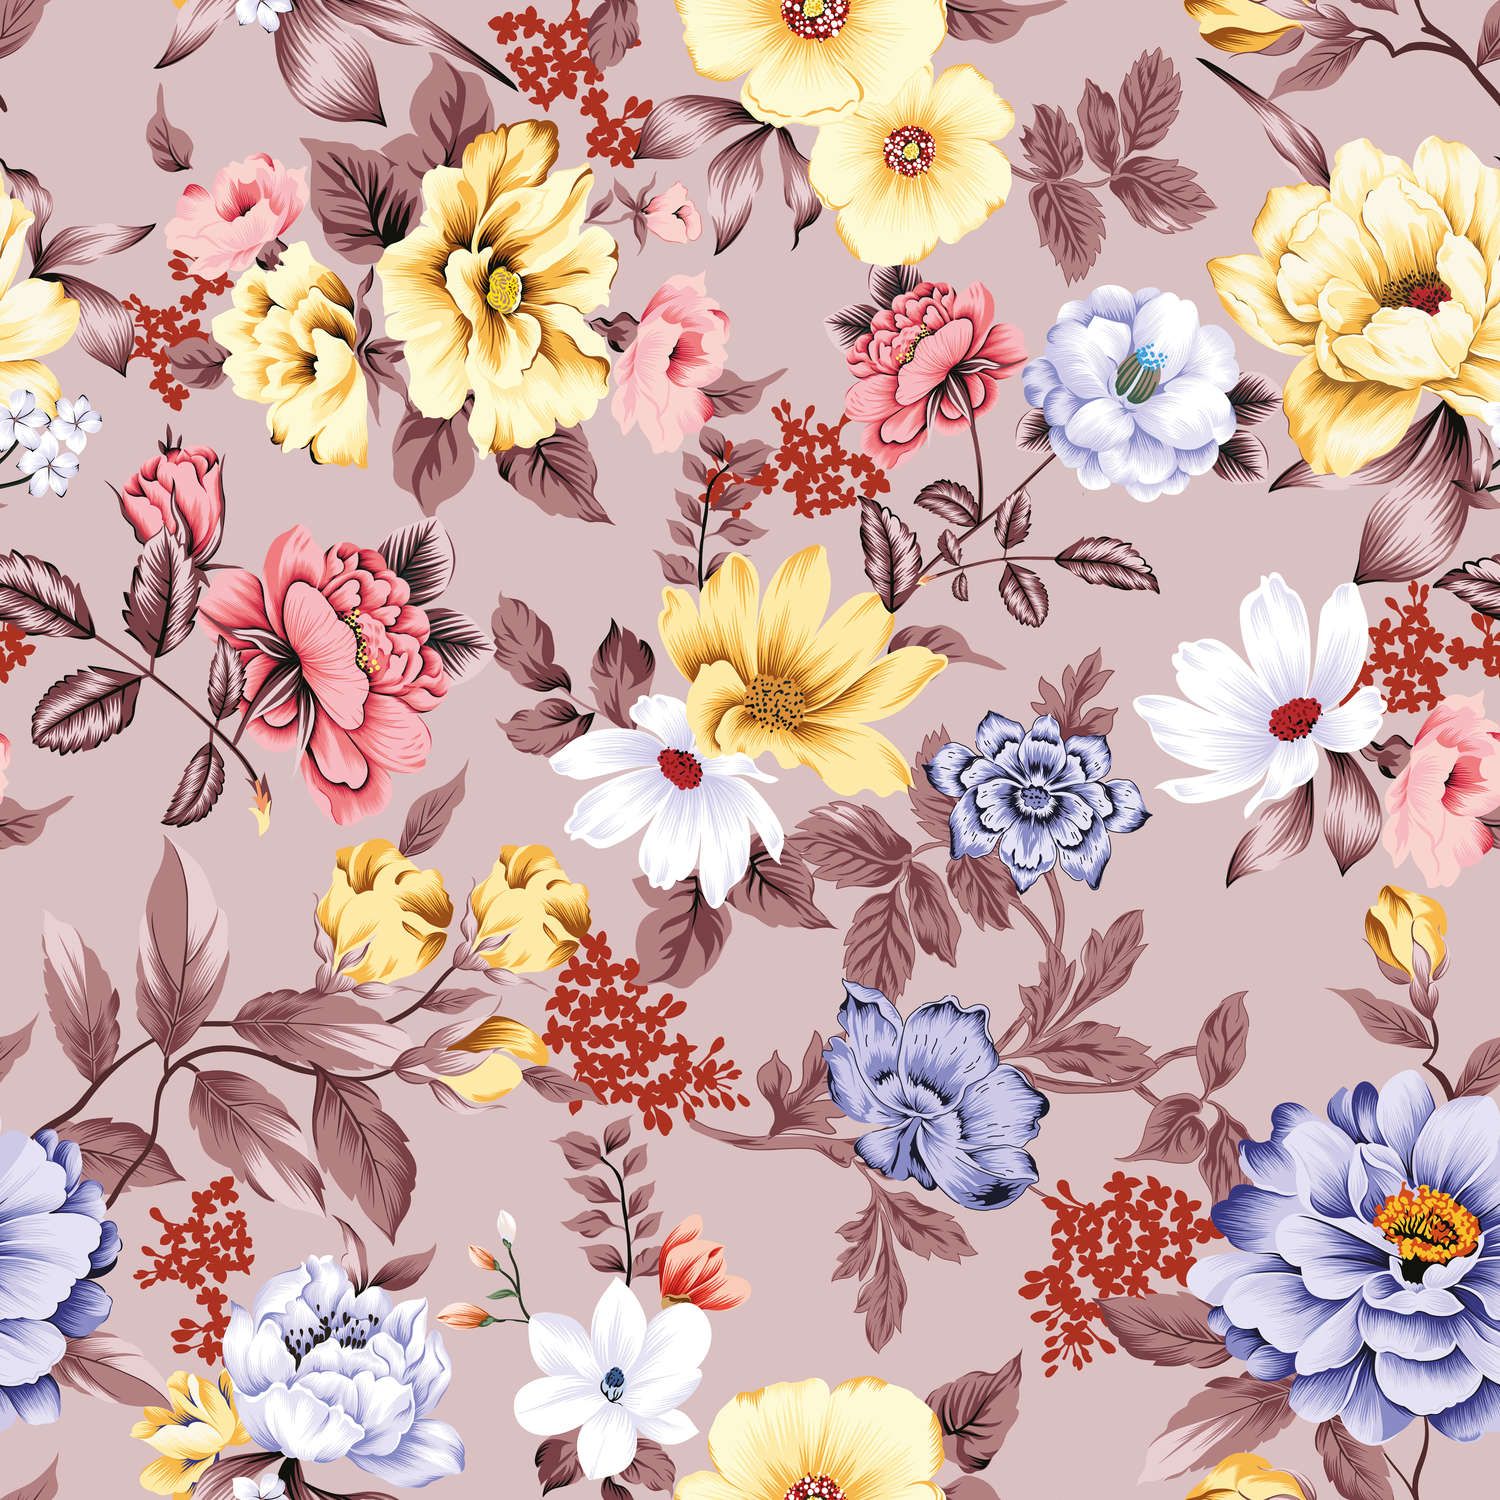             Photo wallpaper floral with flowers and leaves - Smooth & matt non-woven
        